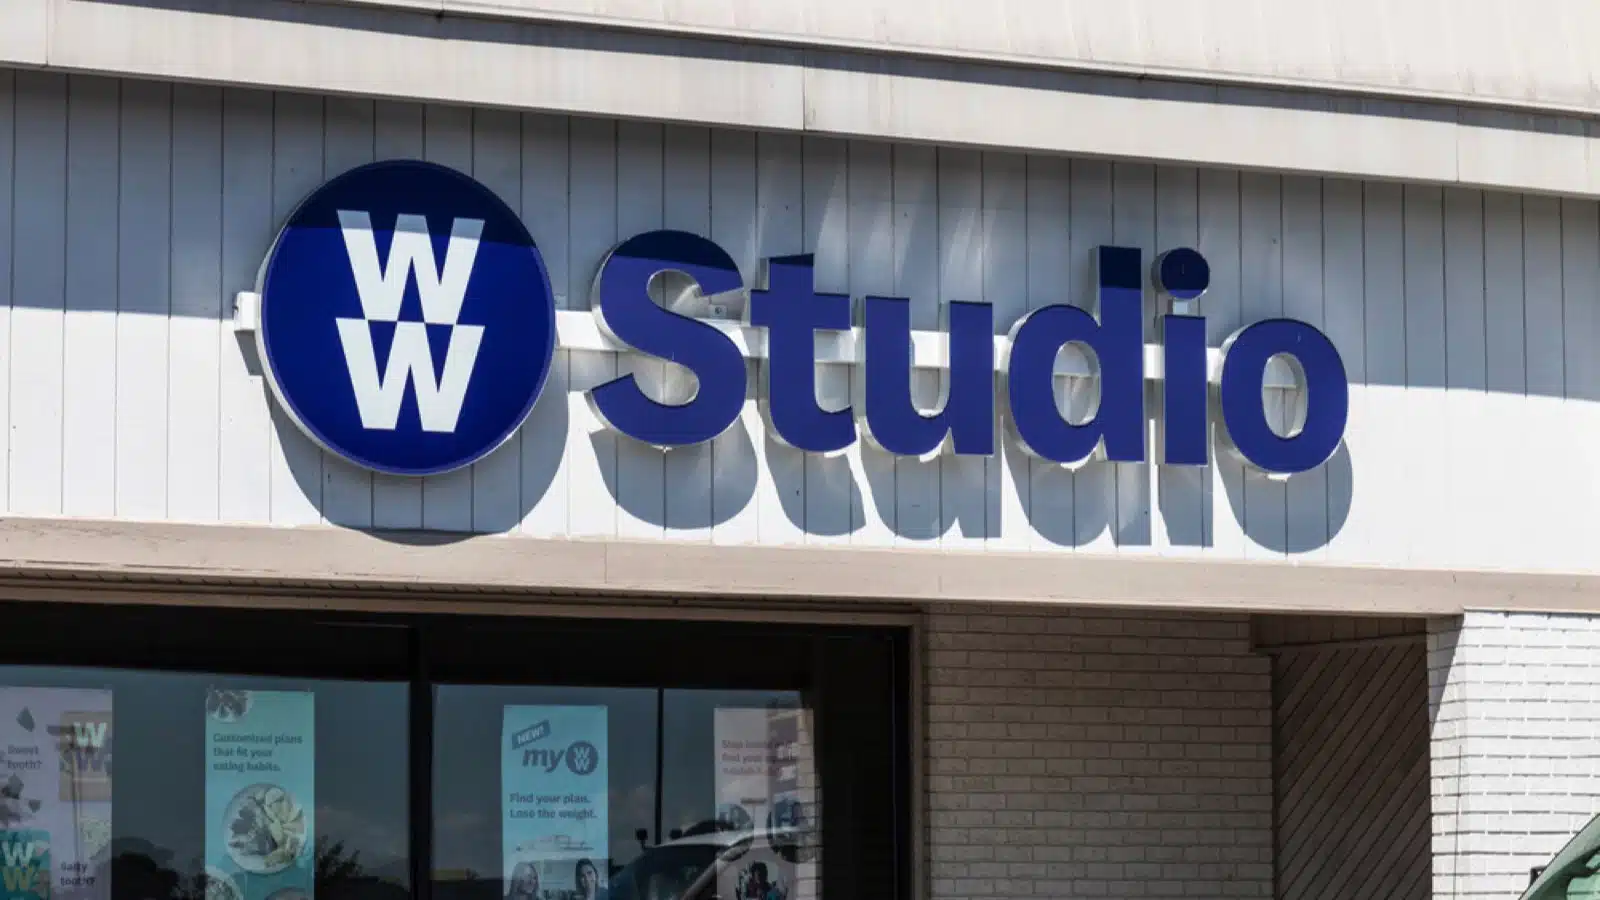 Indianapolis - Circa August 2020: WW International studio, formally Weight Watchers location. WW offers including healthy lifestyle options such as weight loss, maintenance, and fitness.